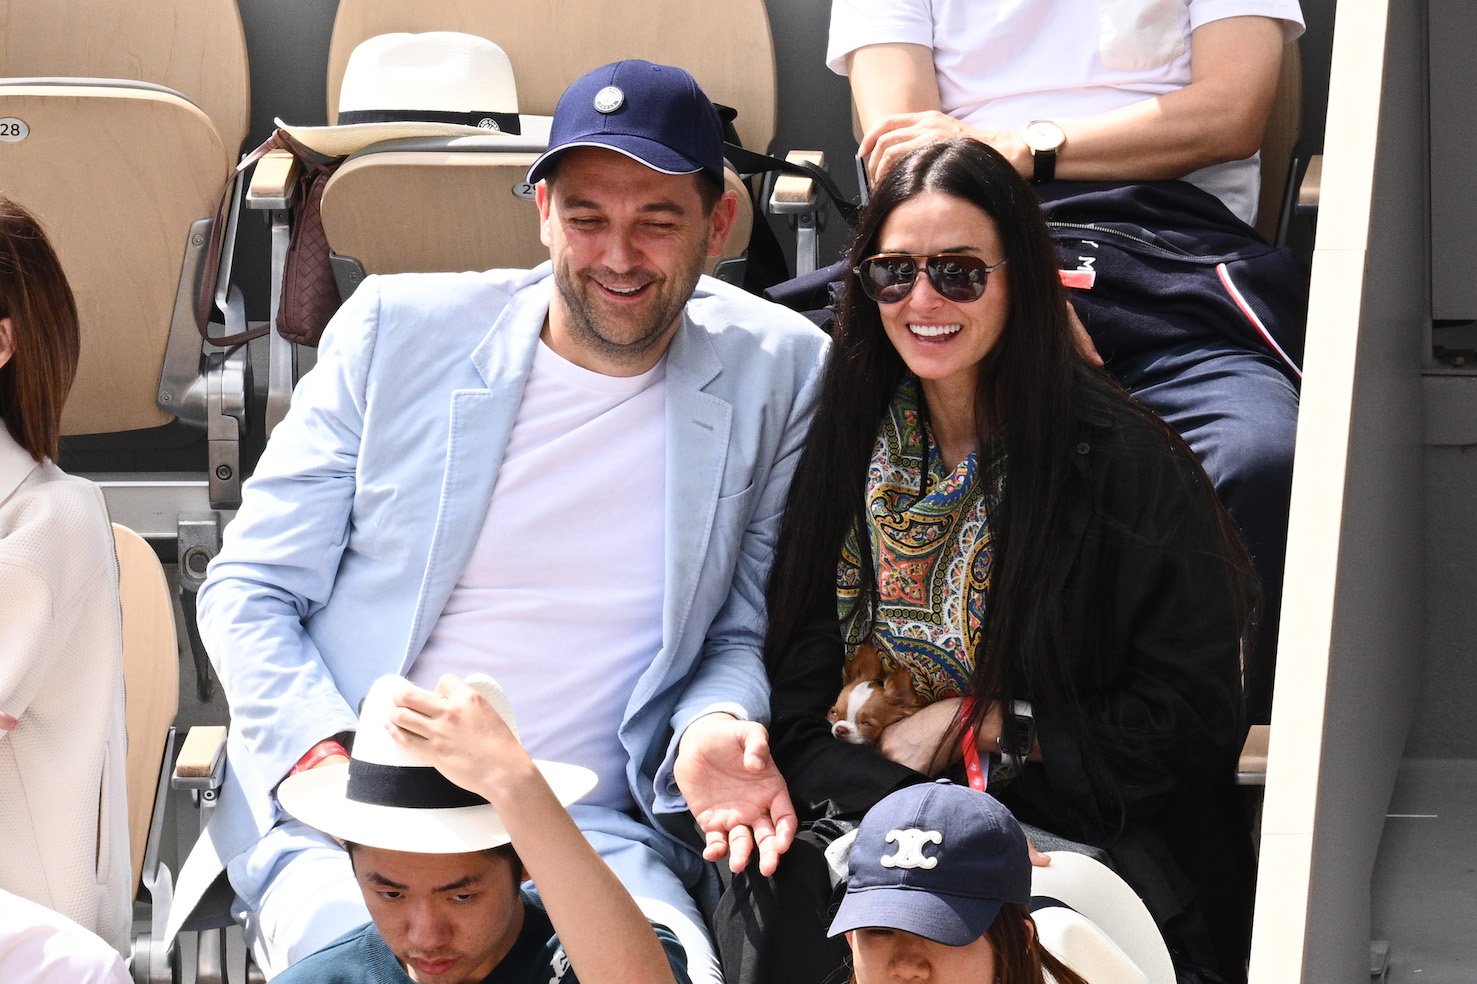 Chef Daniel Humm and Demi Moore sitting together at the French Open 2022